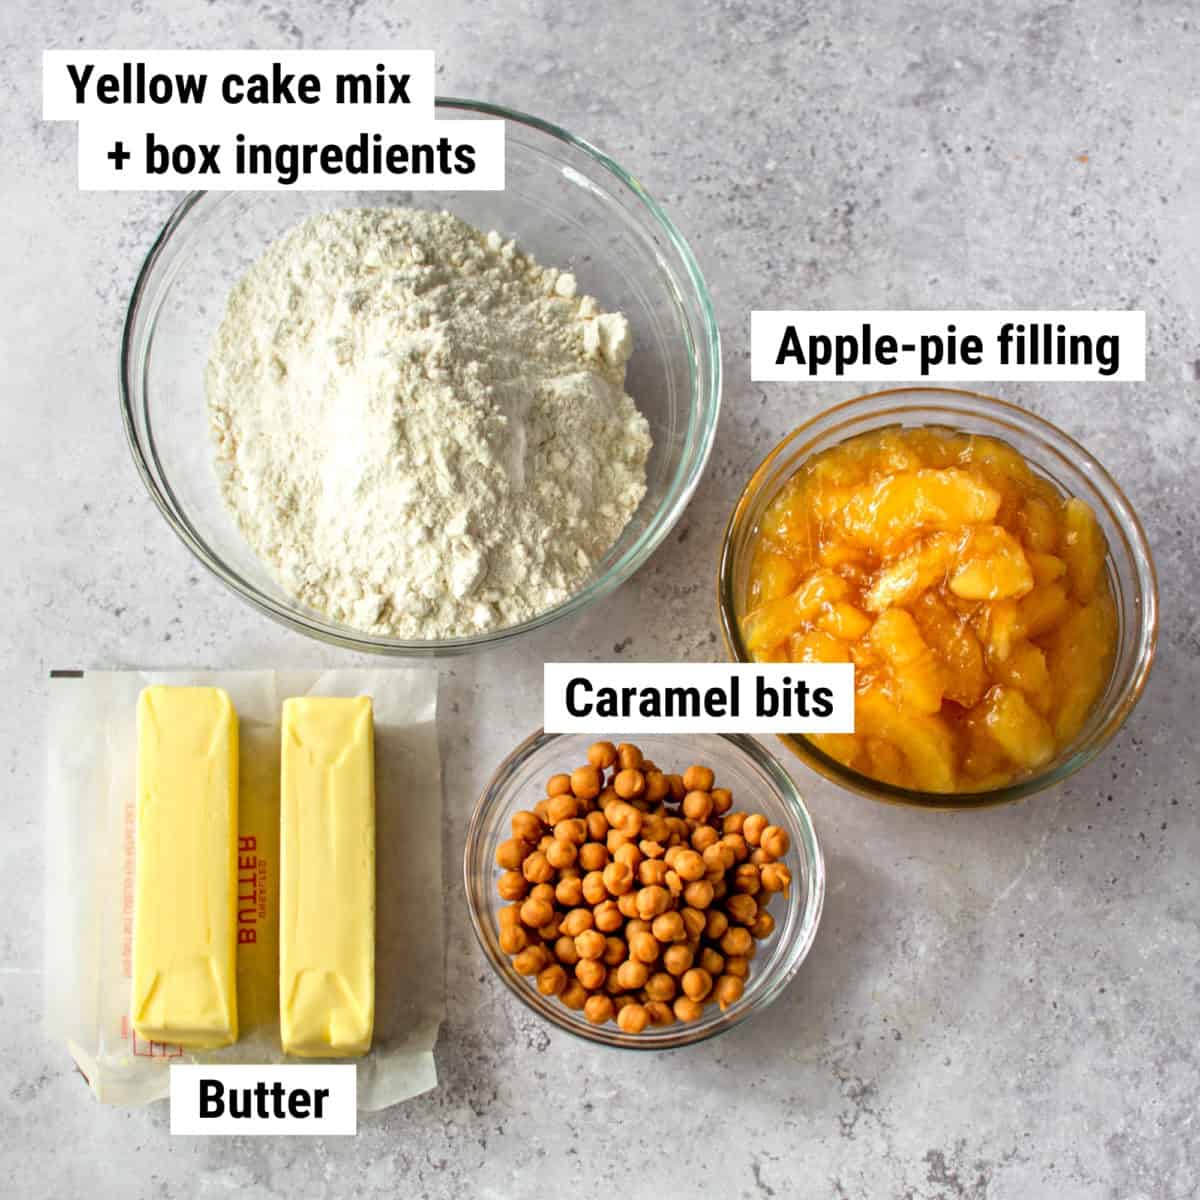 The ingredients to make apple caramel dump cake spread out on a table.